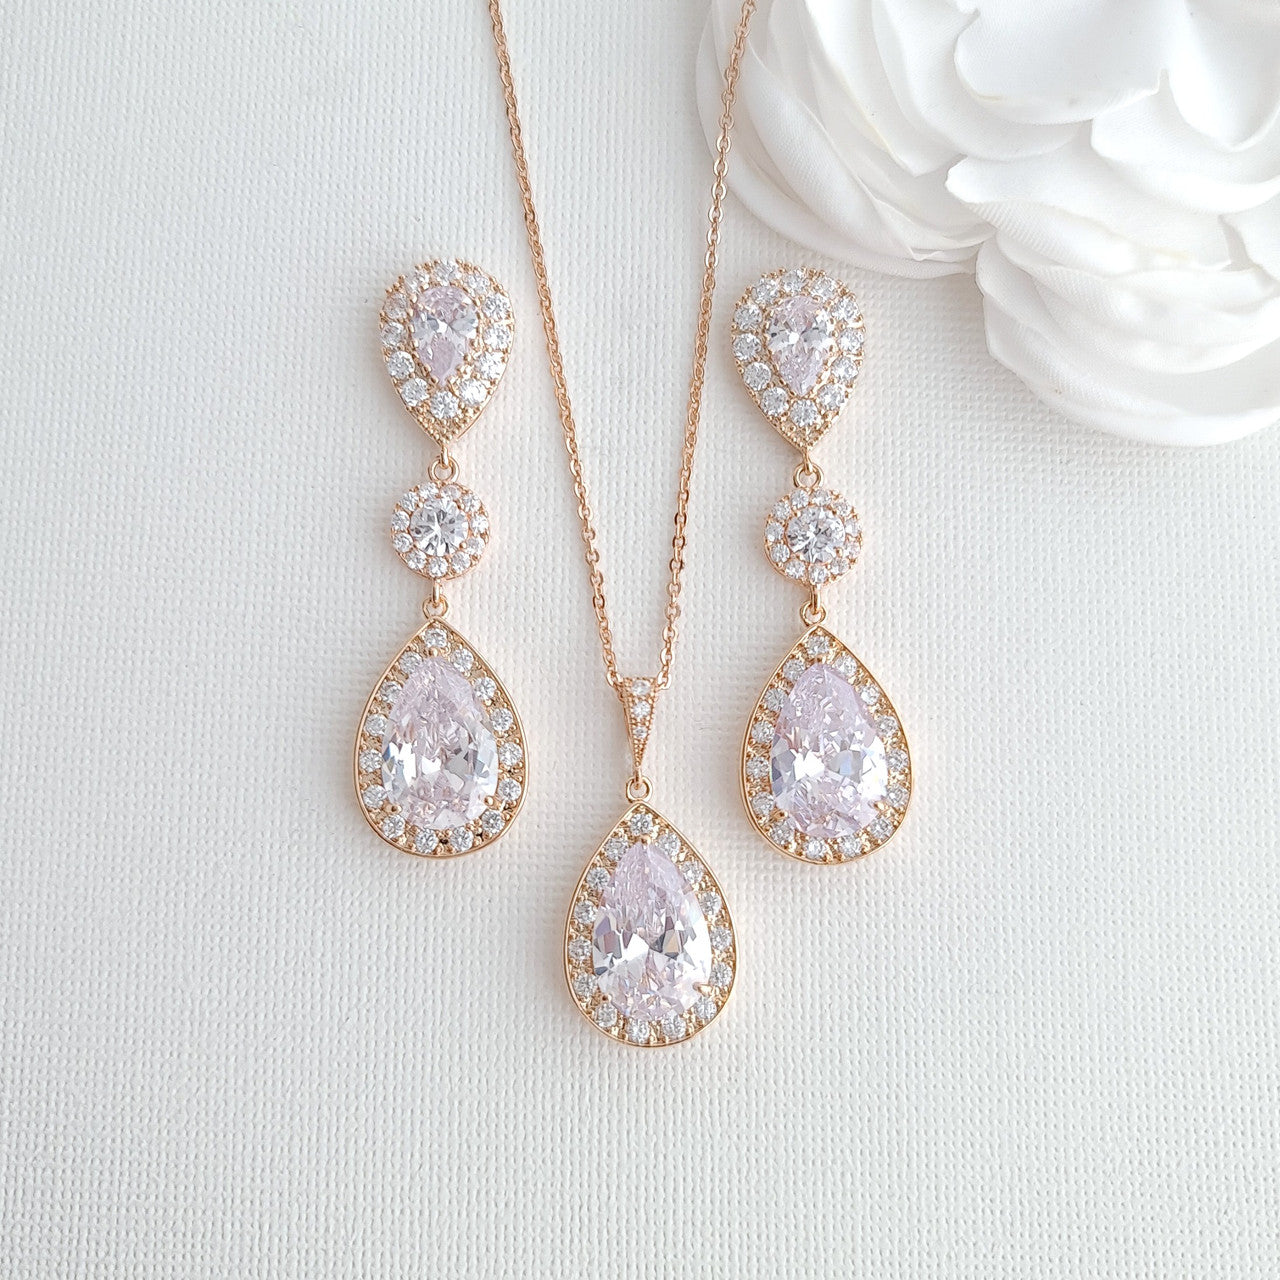 Gold Wedding Jewelry Sets for Brides With Earrings Necklace Together- Penelope